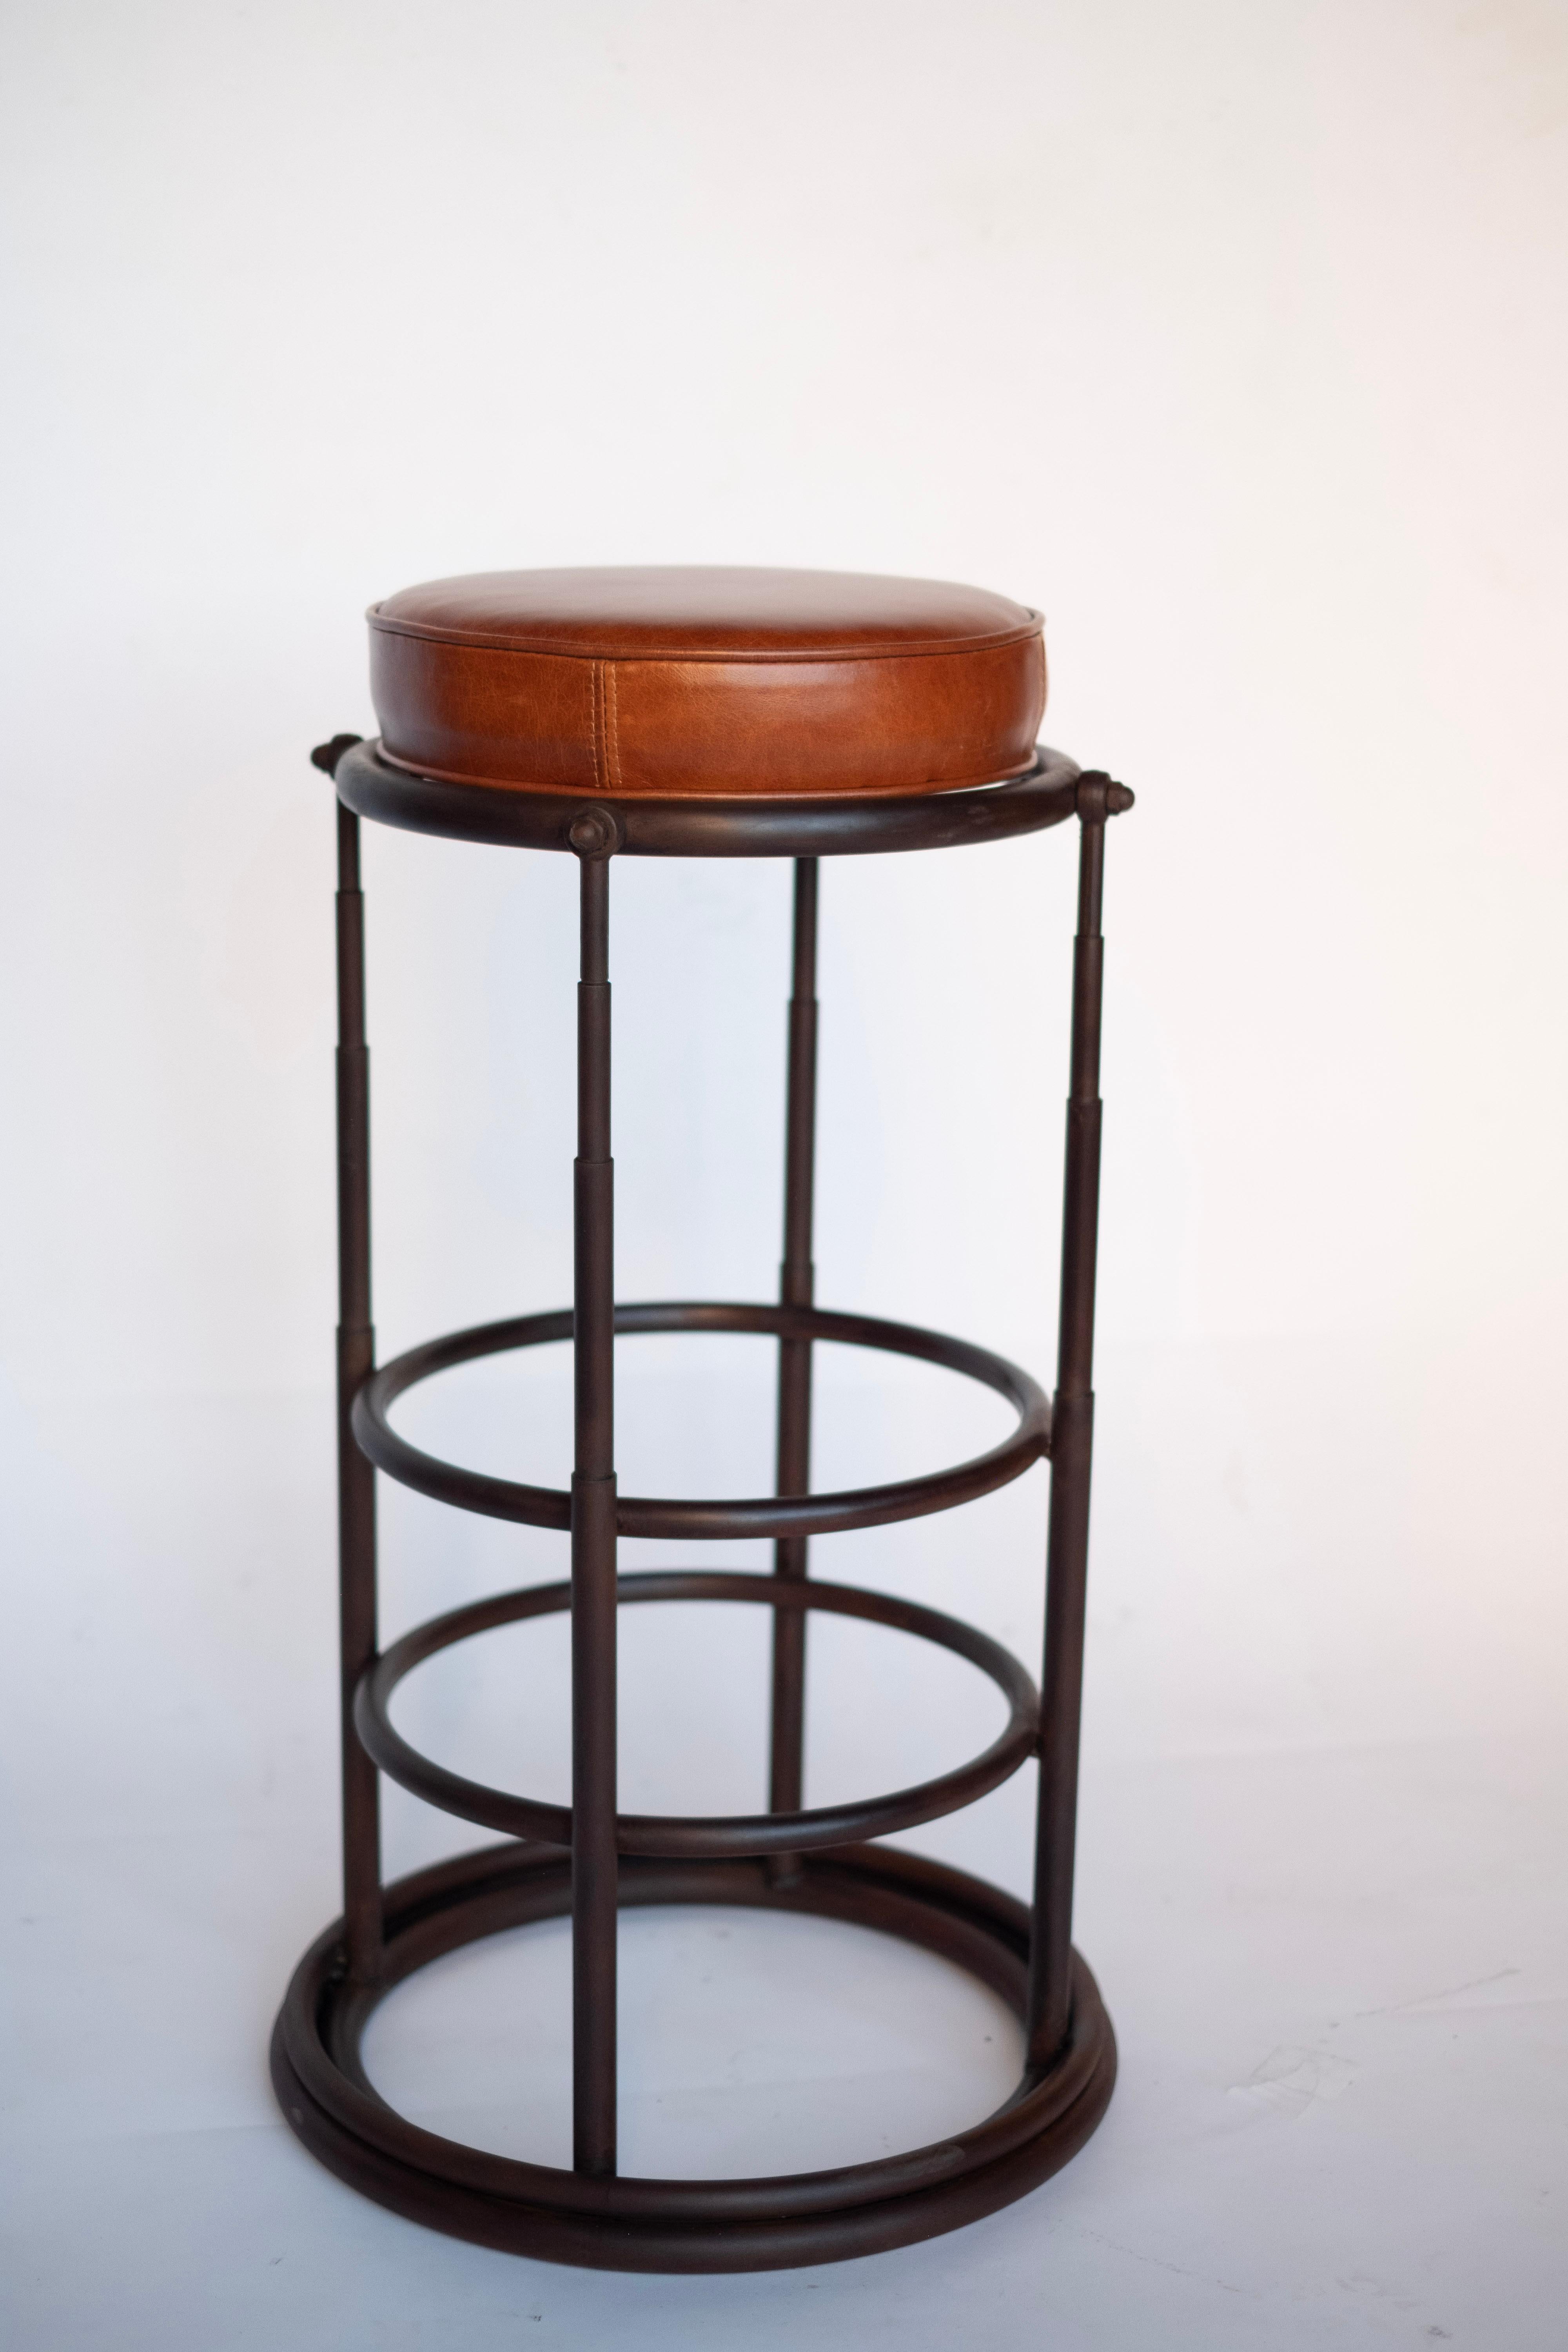 Jordan Mozer (b.1958): Cairo720 barstools, oxidized and clear coated cast steel and welded tubular steel structures with leather upholstered cushions, 1987-2019. Provenance: Collection of the artist. Signed. New. 
Measures: 16” diameter x 31” tall